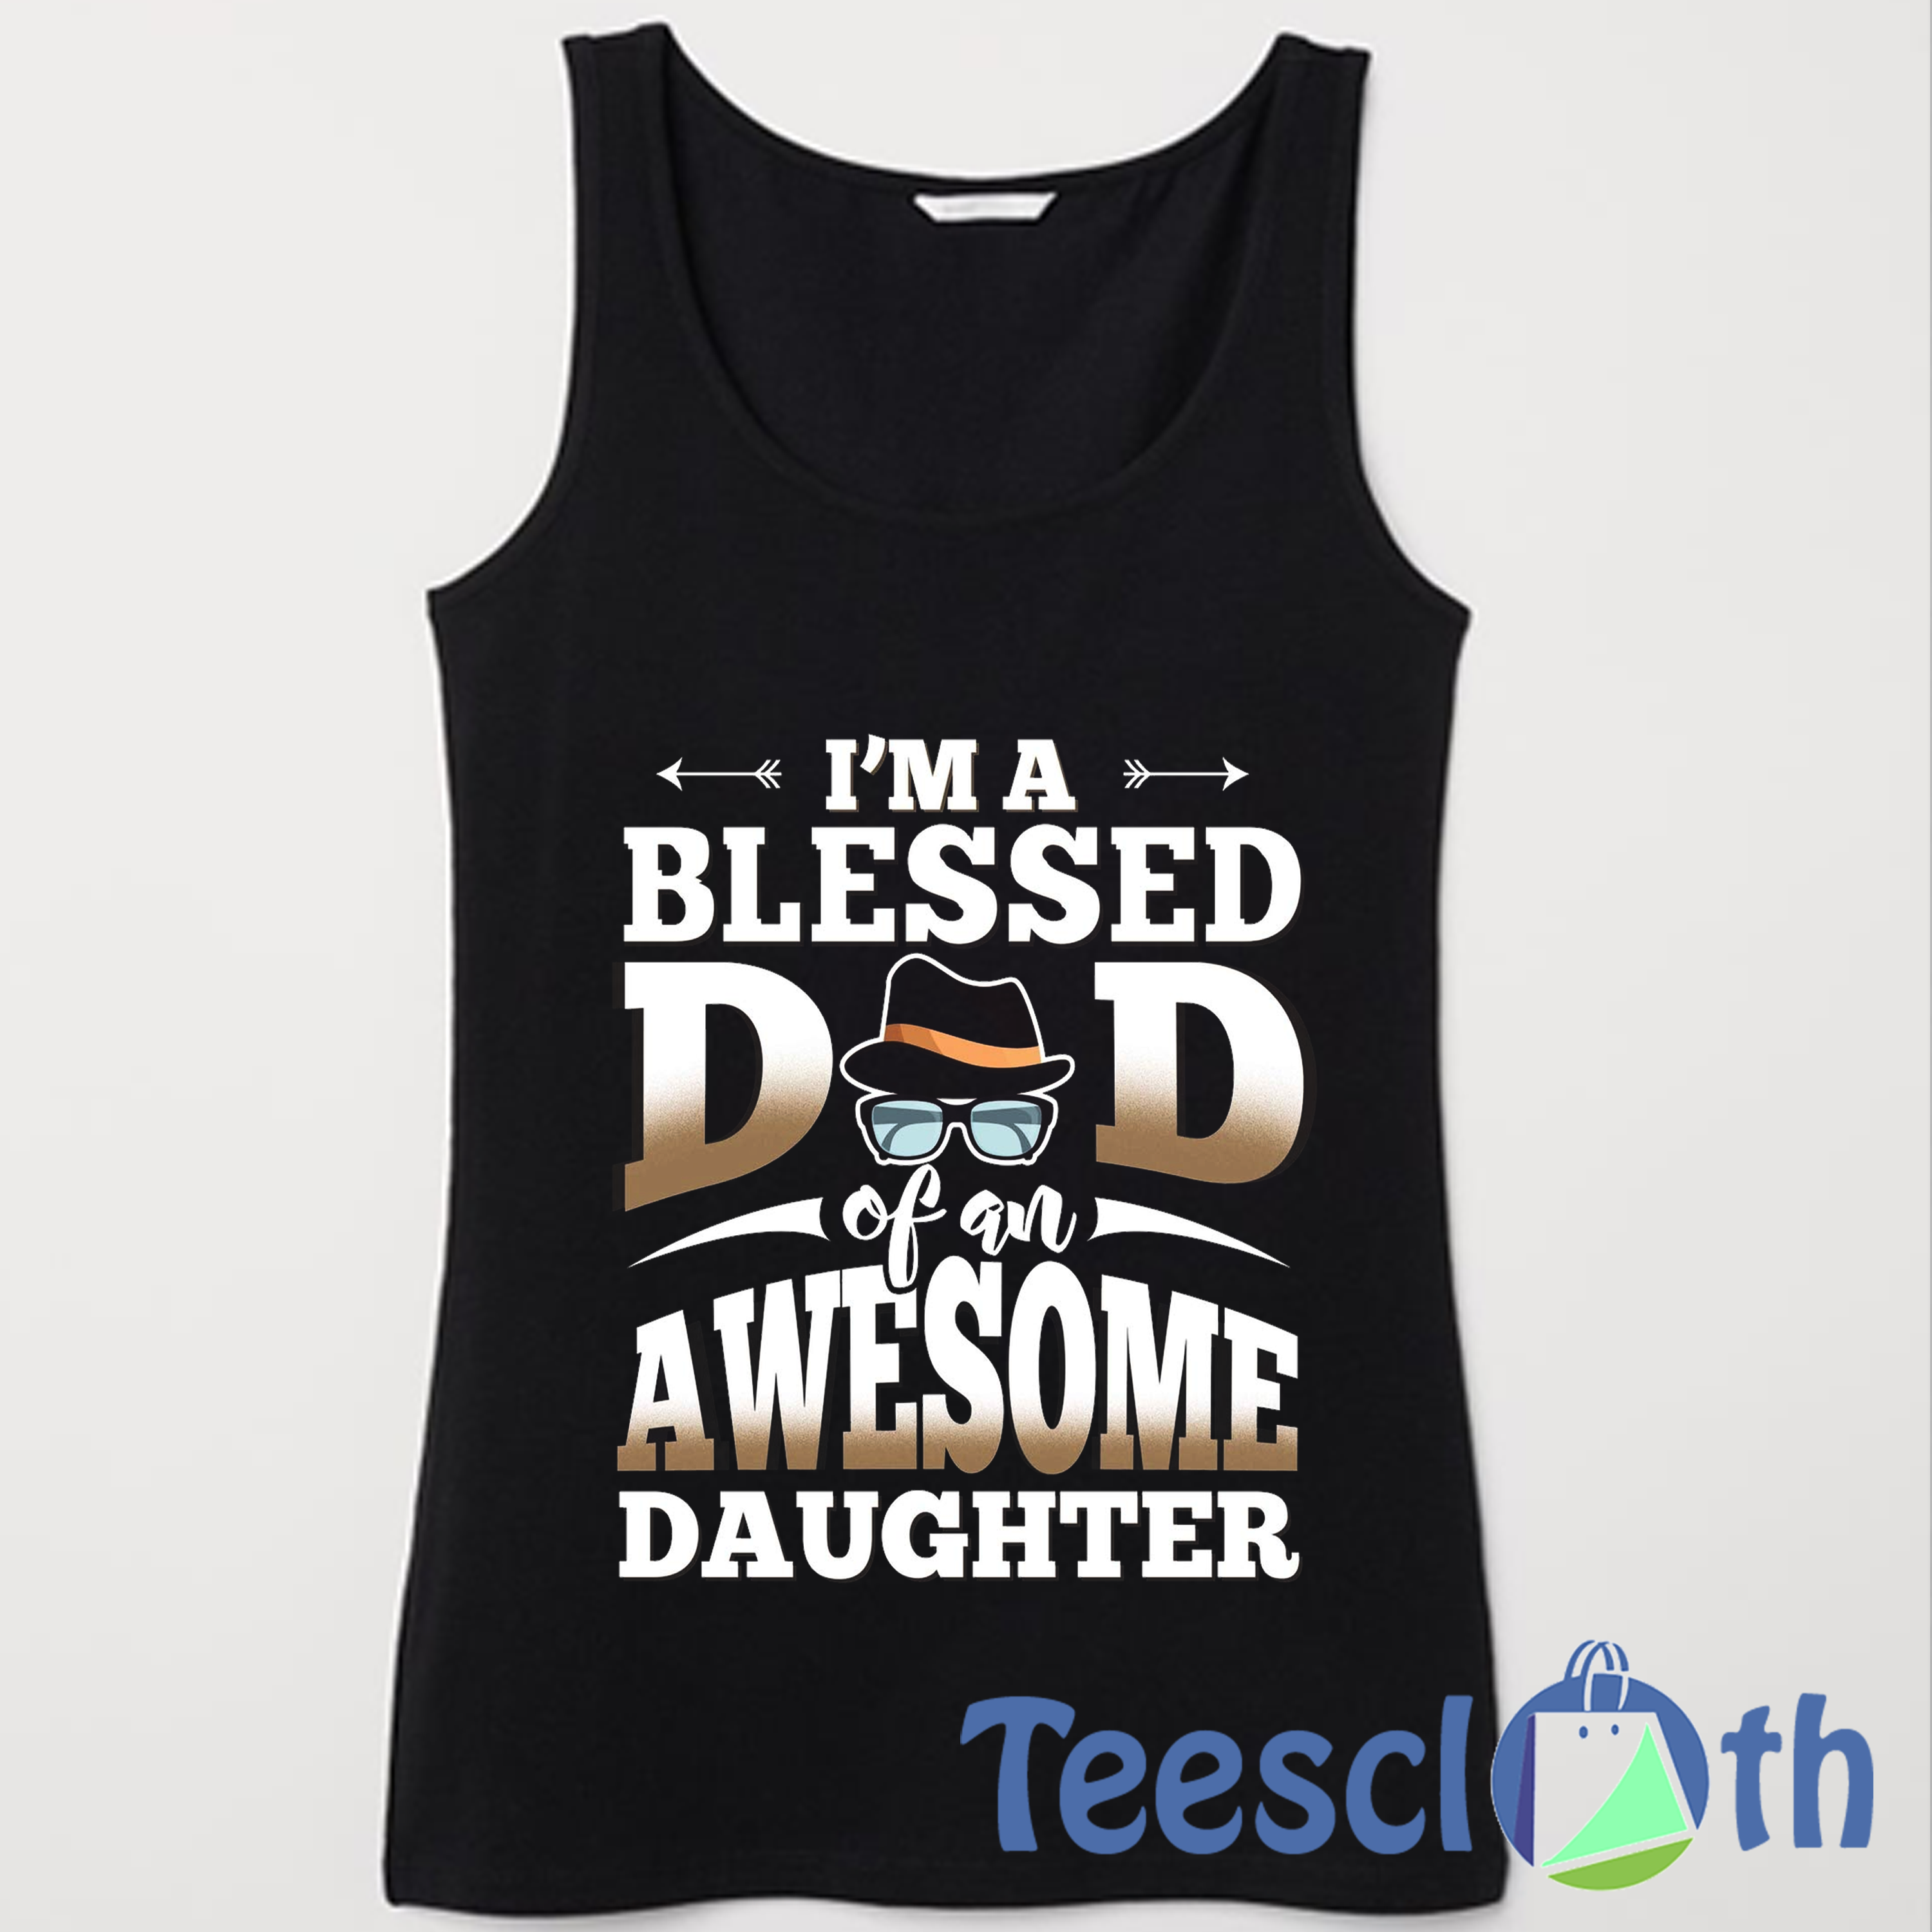 I’m A Blessed Dad Tank Top Men And Women Size S to 3XL